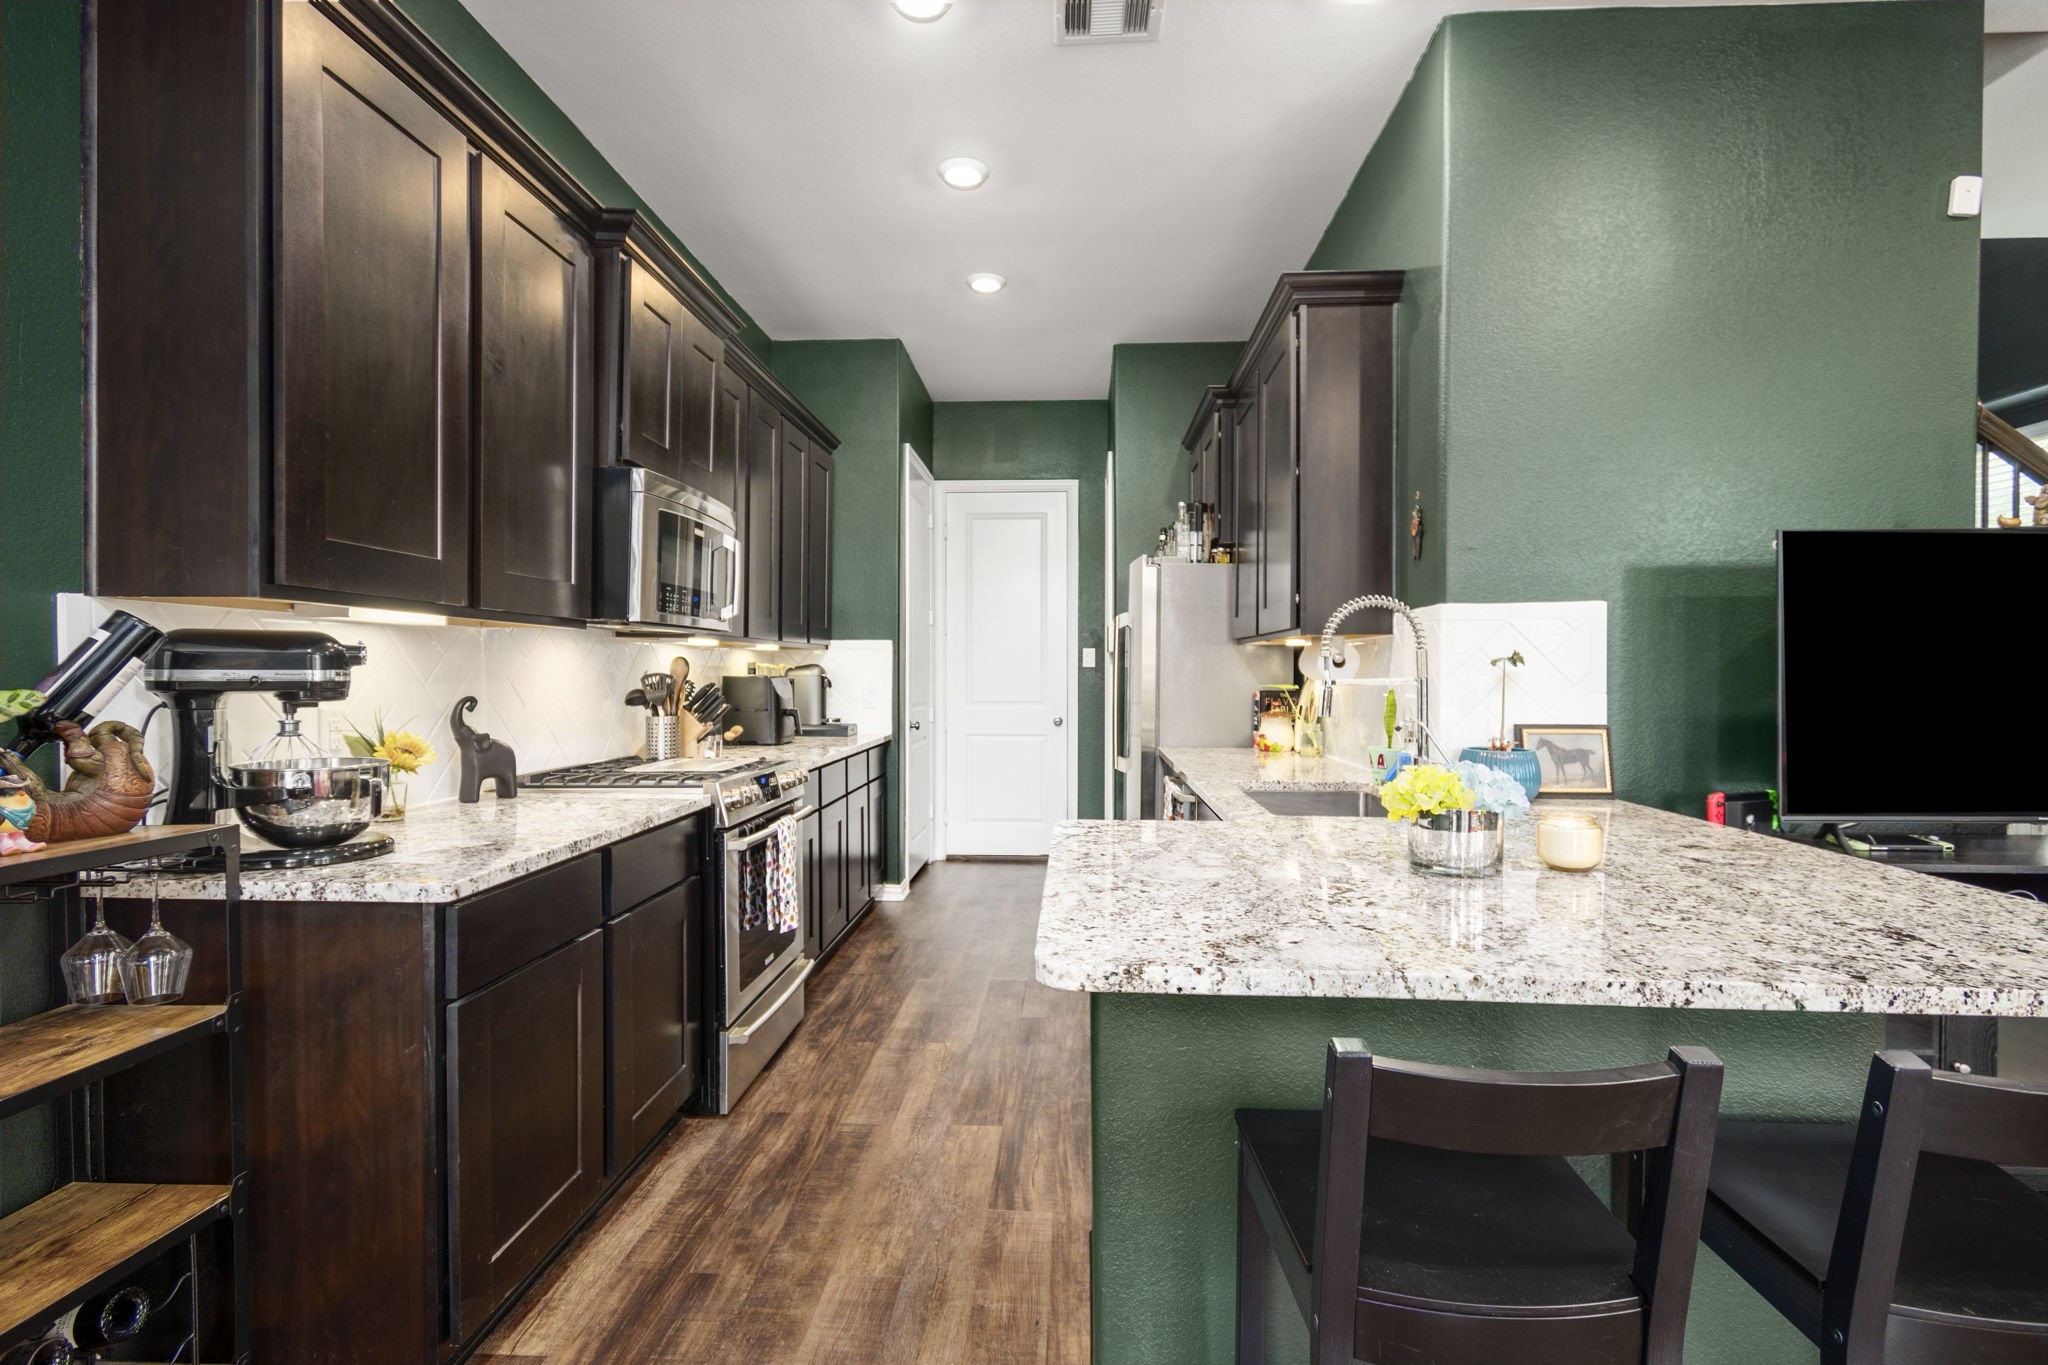 The kitchen offers ample counter space and a great gas range for the chef!